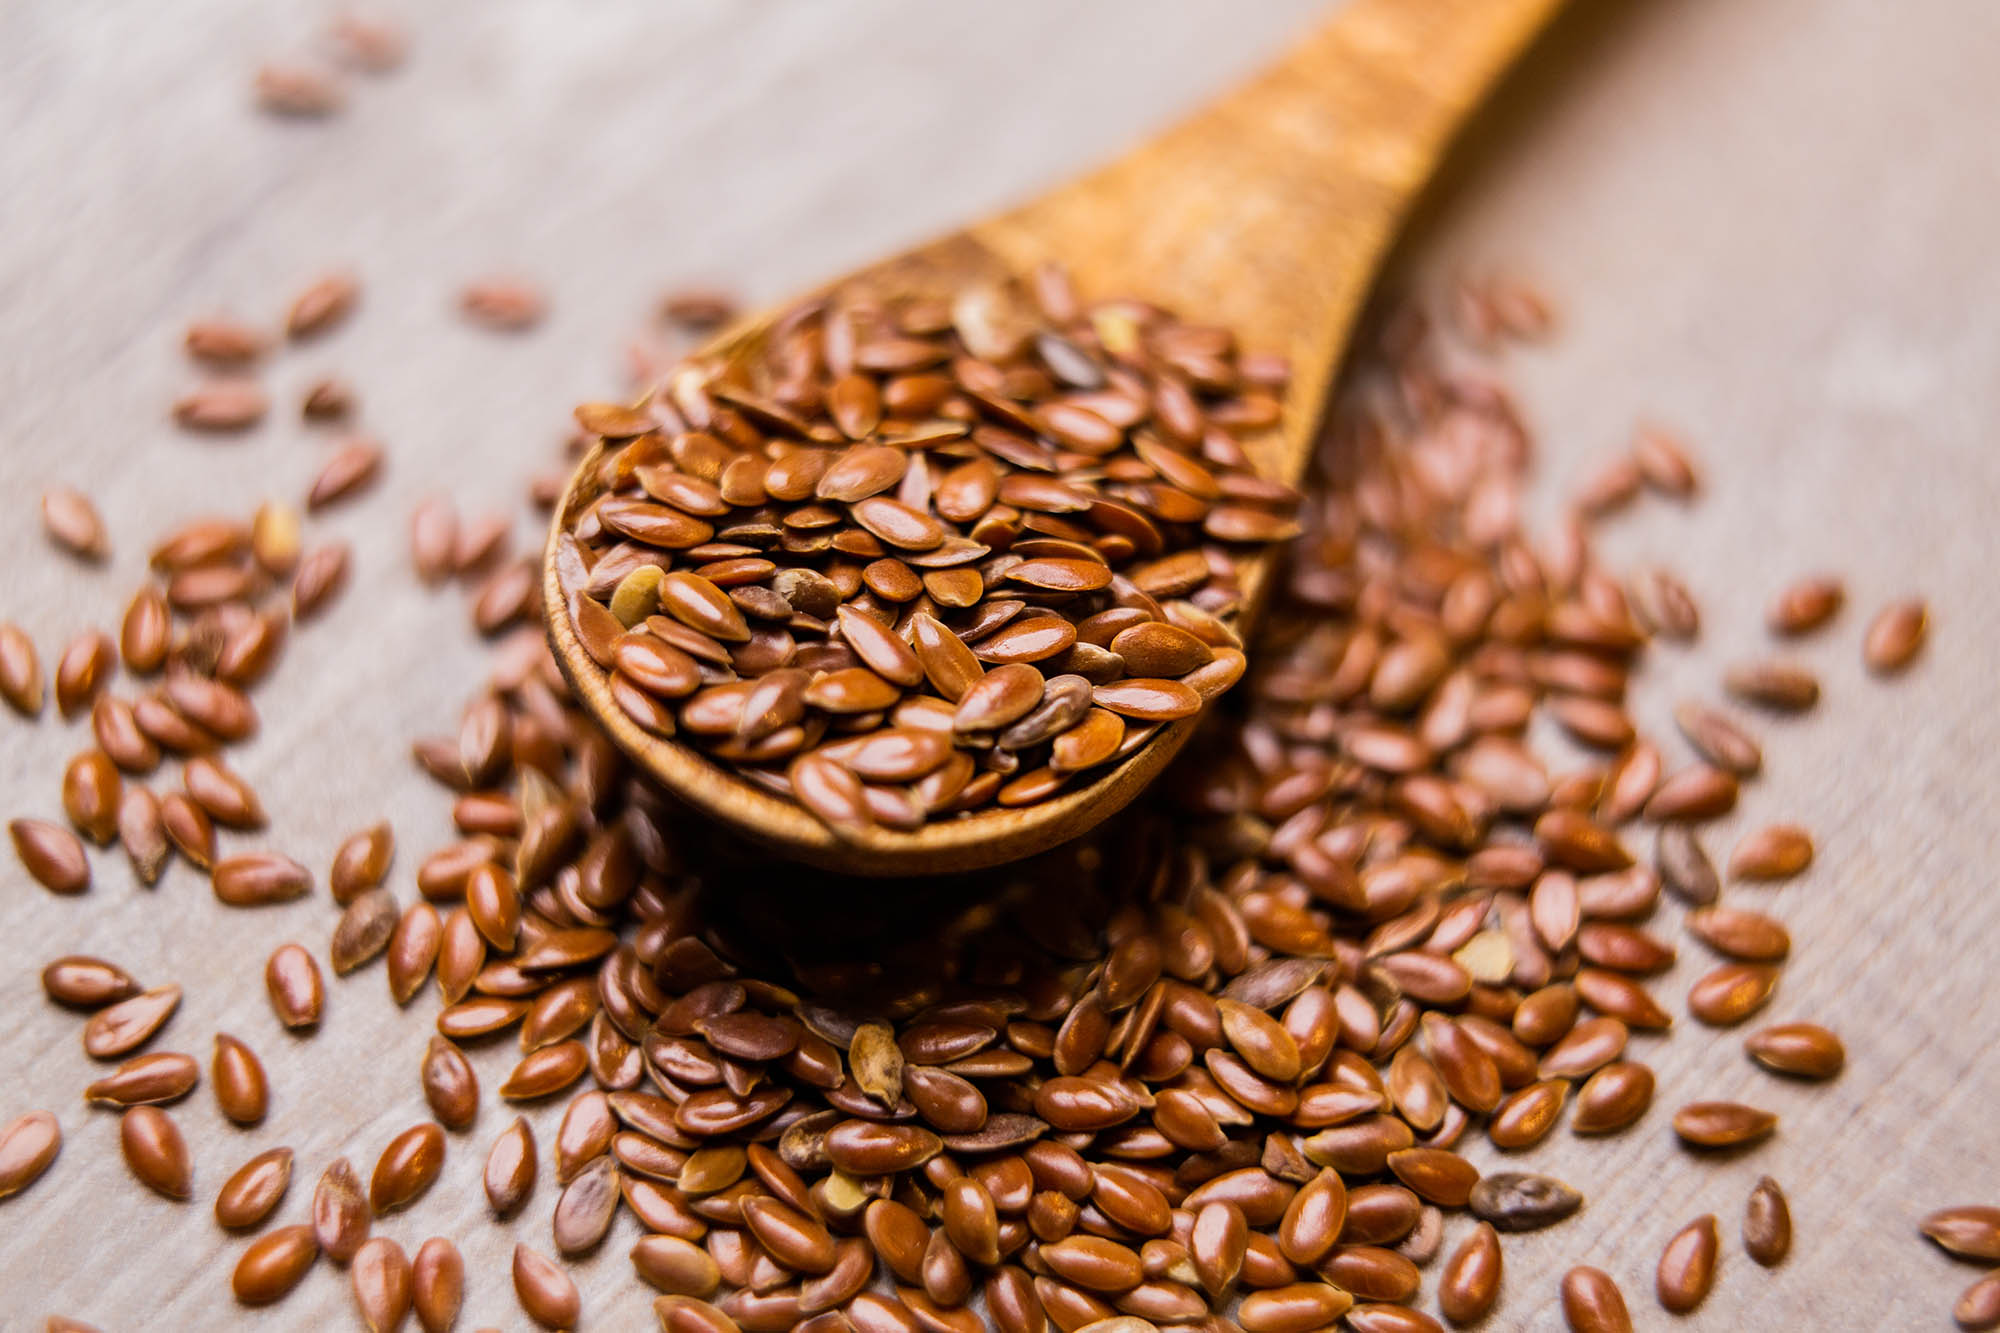 Where Can I Buy Flax Seeds